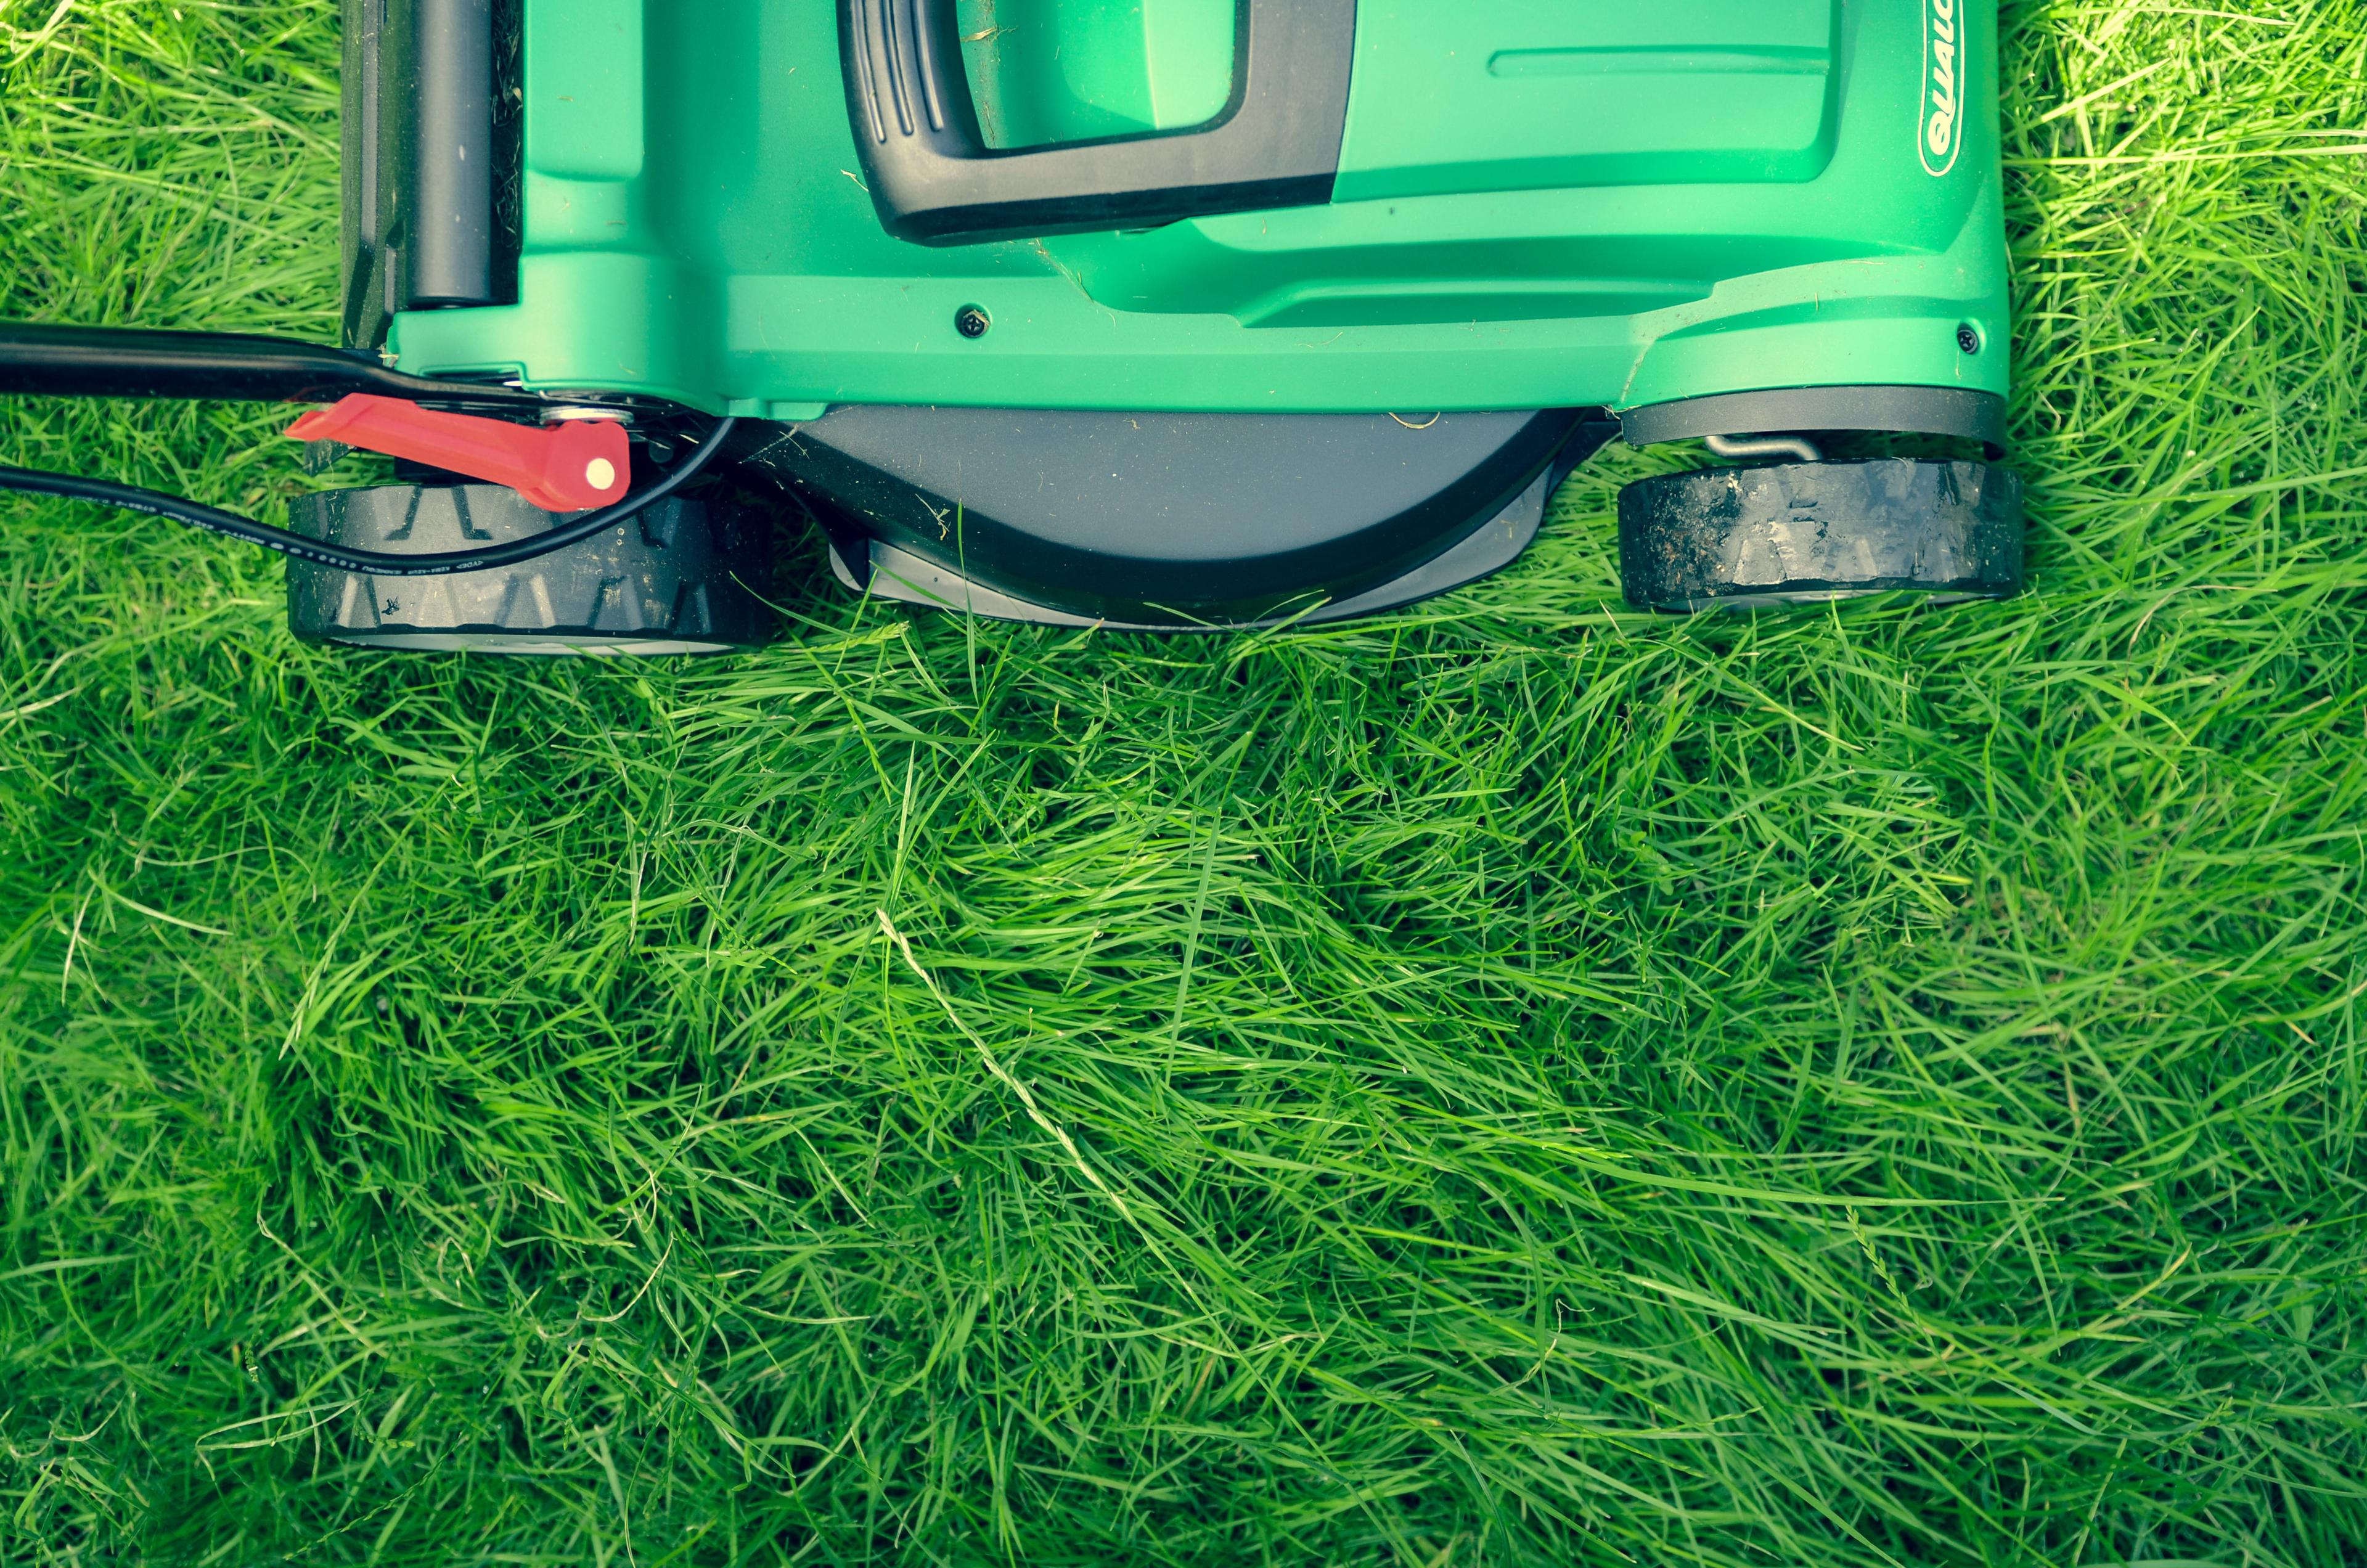 Gas-powered lawn mowers are capable of producing more air pollution than cars.